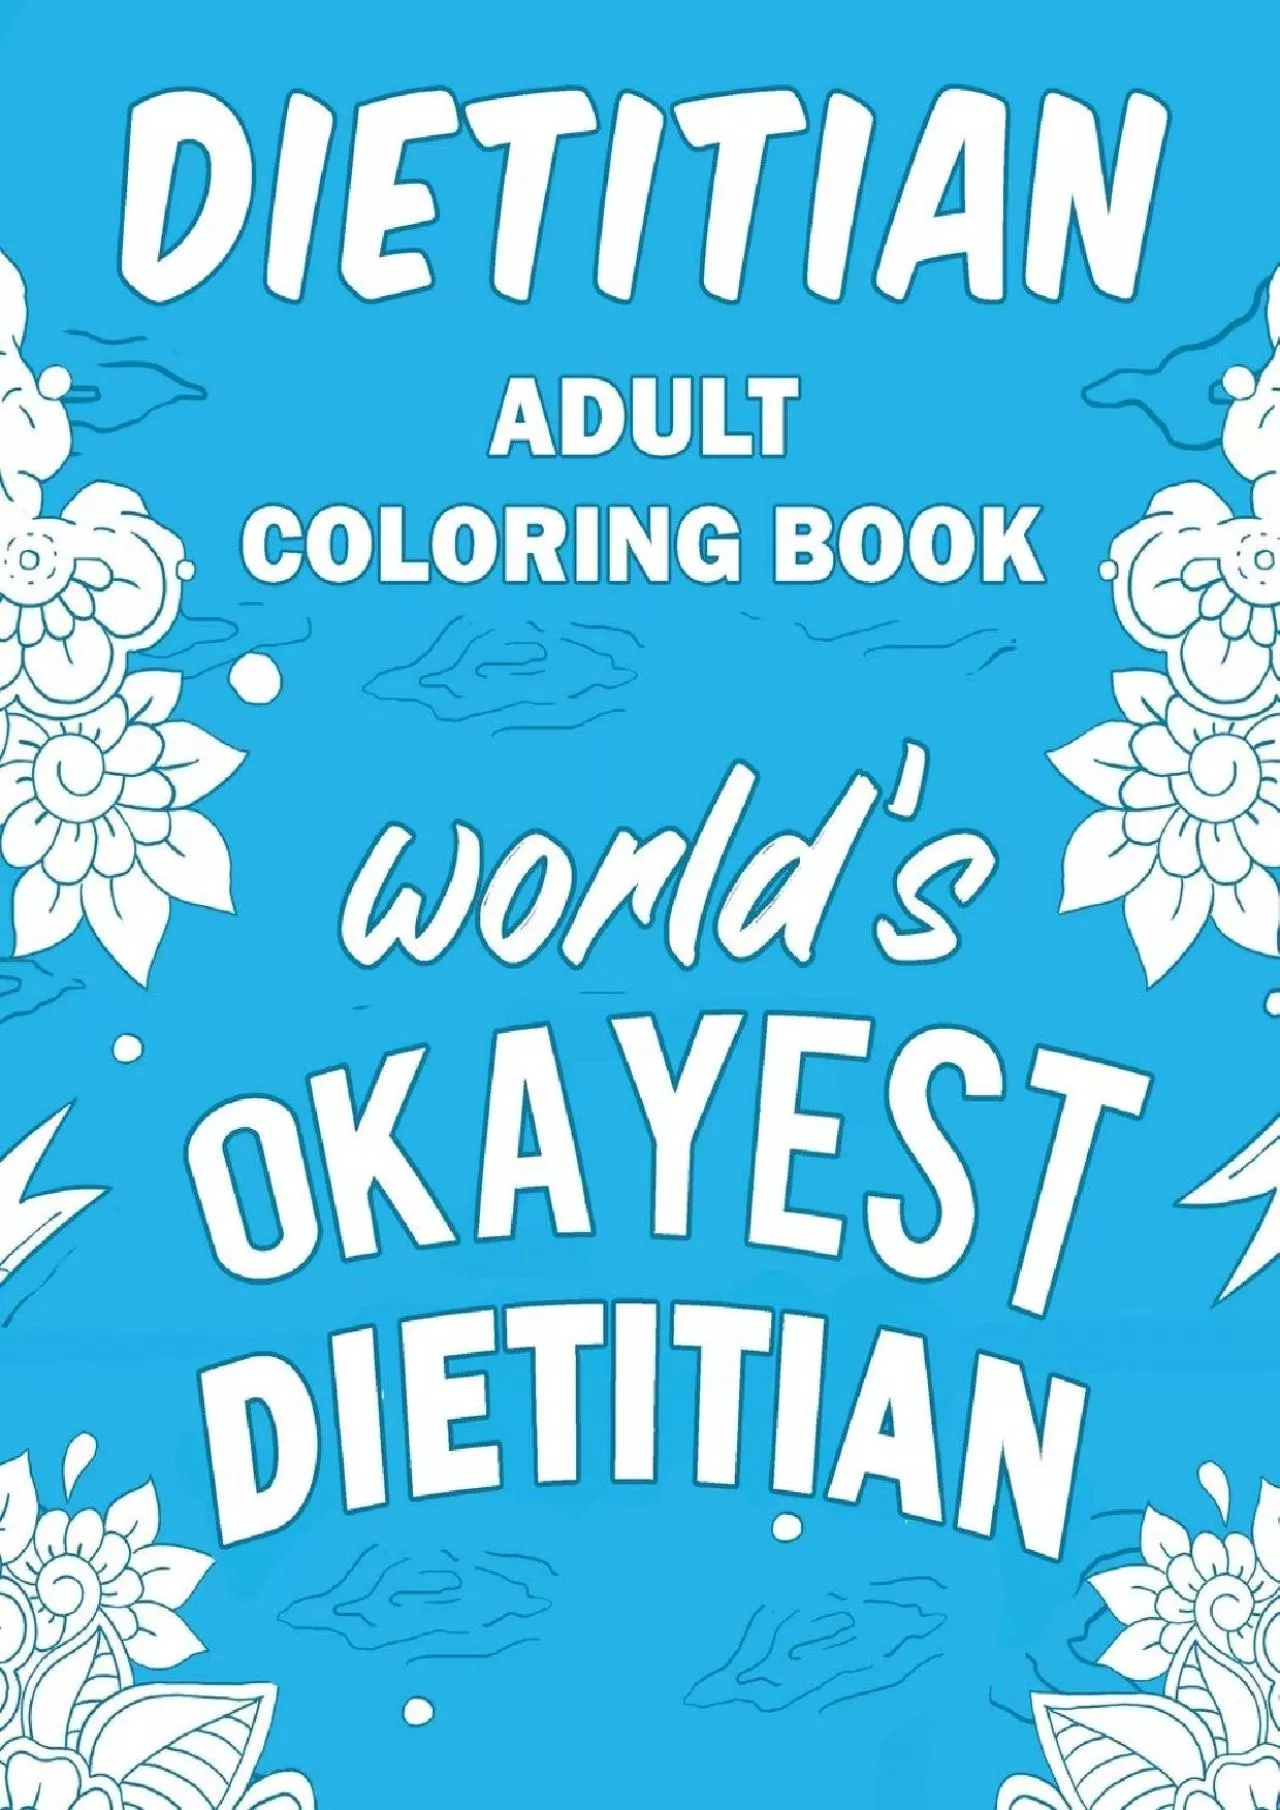 (DOWNLOAD)-Dietitian Adult Coloring Book: A Snarky, Humorous & Relatable Adult Coloring